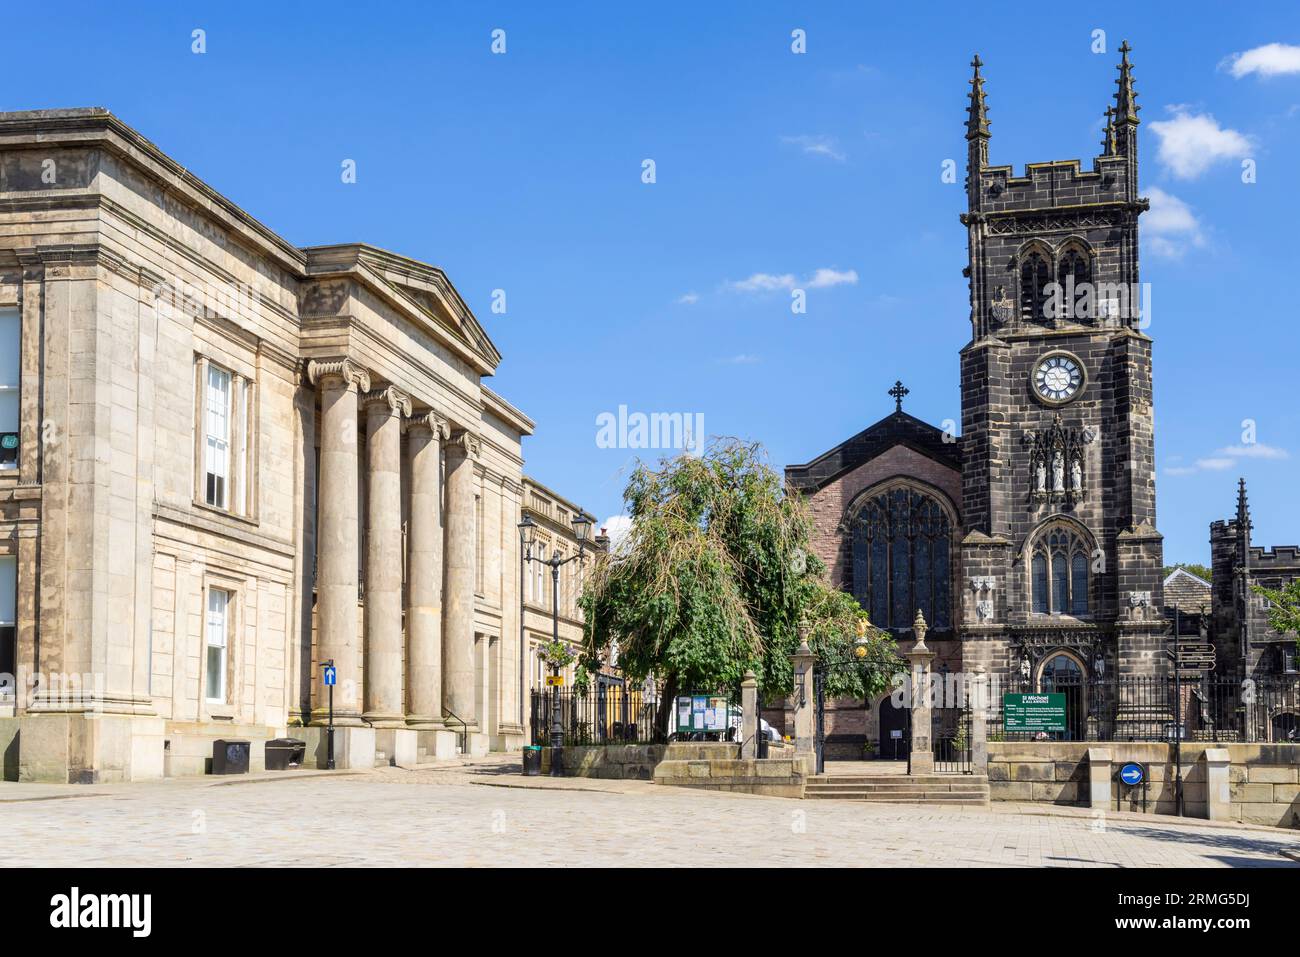 Macclesfield Town Hall Macclesfield et St Michael and All Angels Church Macclesfield Cheshire East England UK GB Europe Banque D'Images